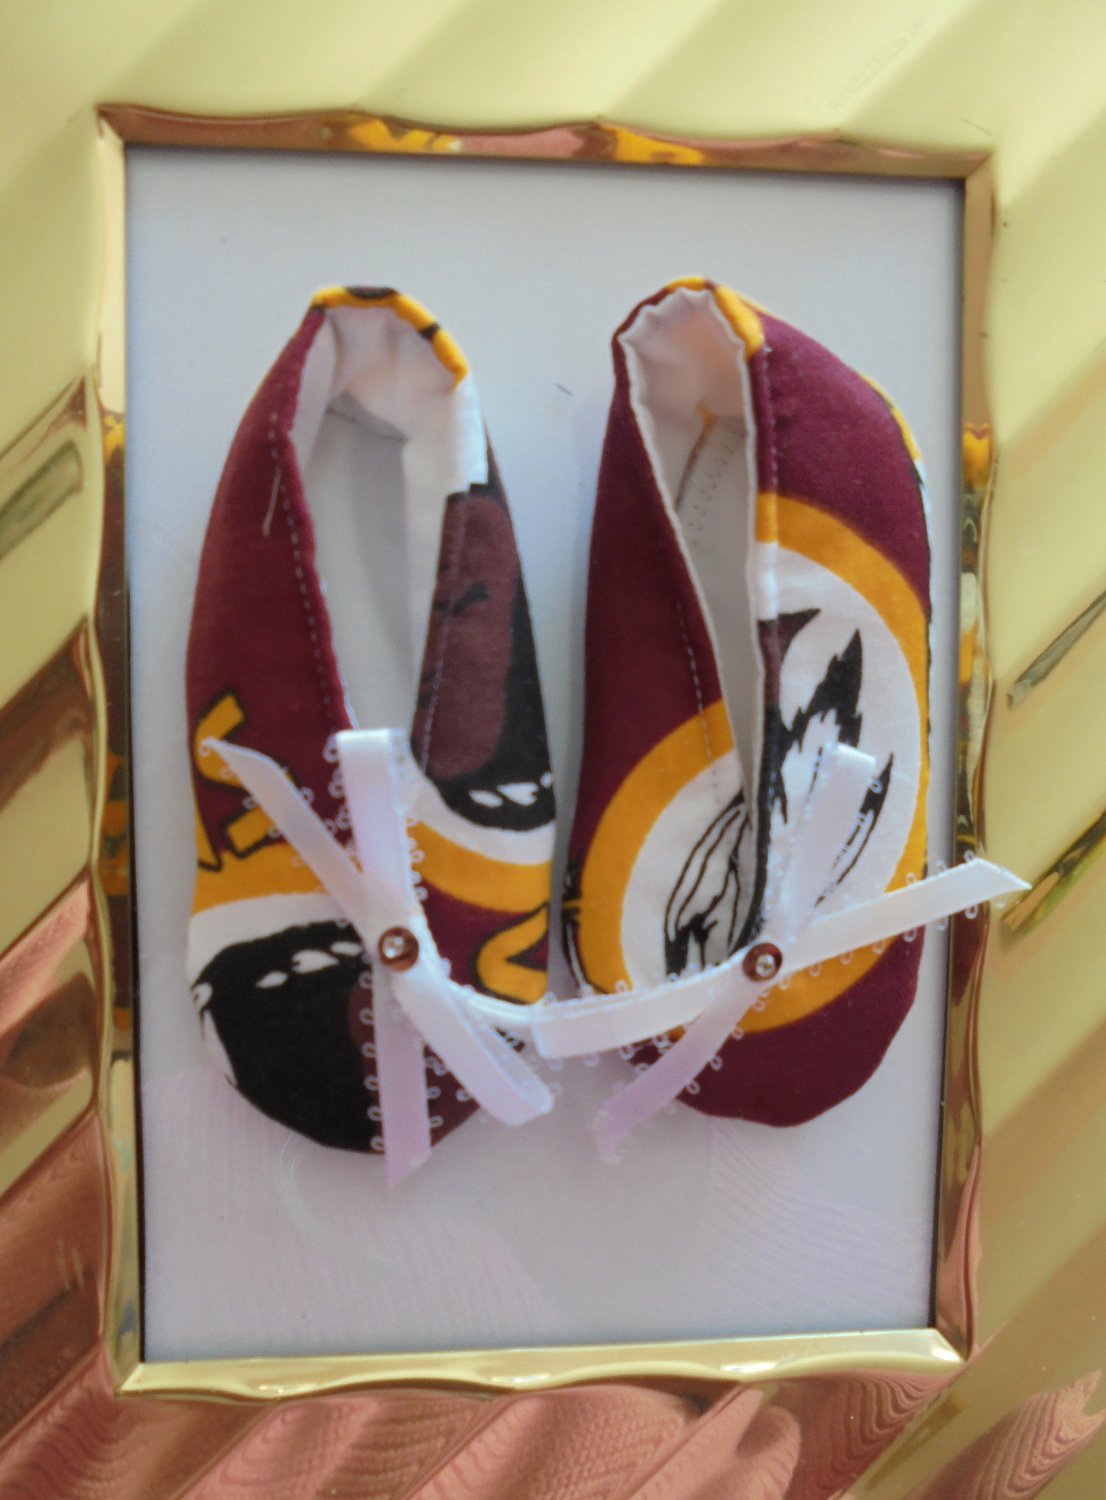 Baby Shoes 3-6 Mo. Girls - Handmade NFL Washington Redskins Booties w/Sequin and Beading